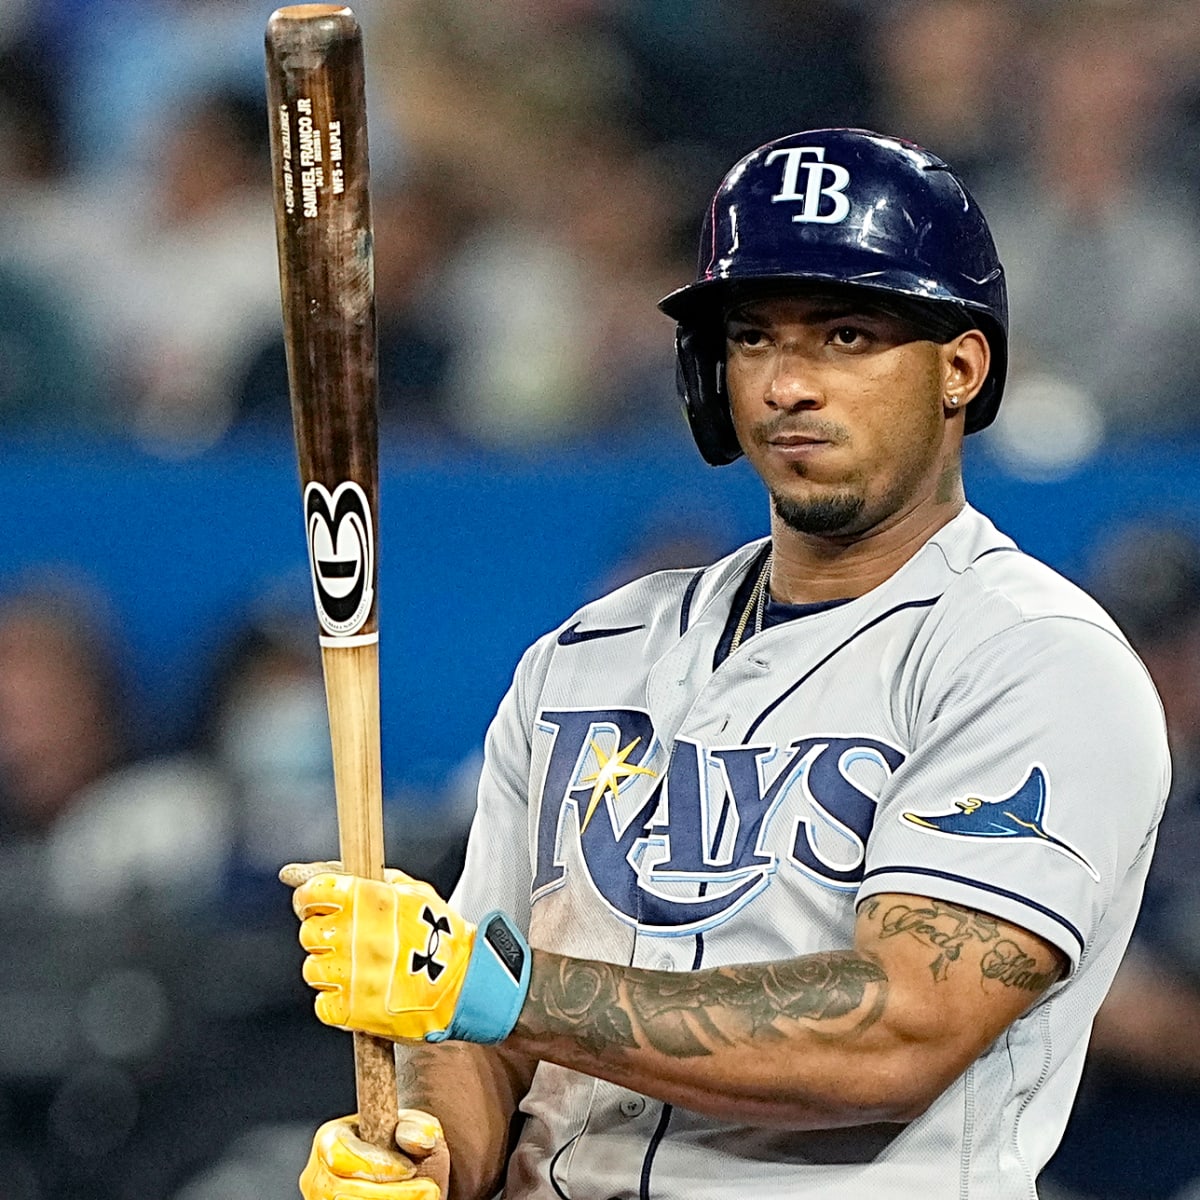 Now that the Rays have invested in Wander Franco, you can, too